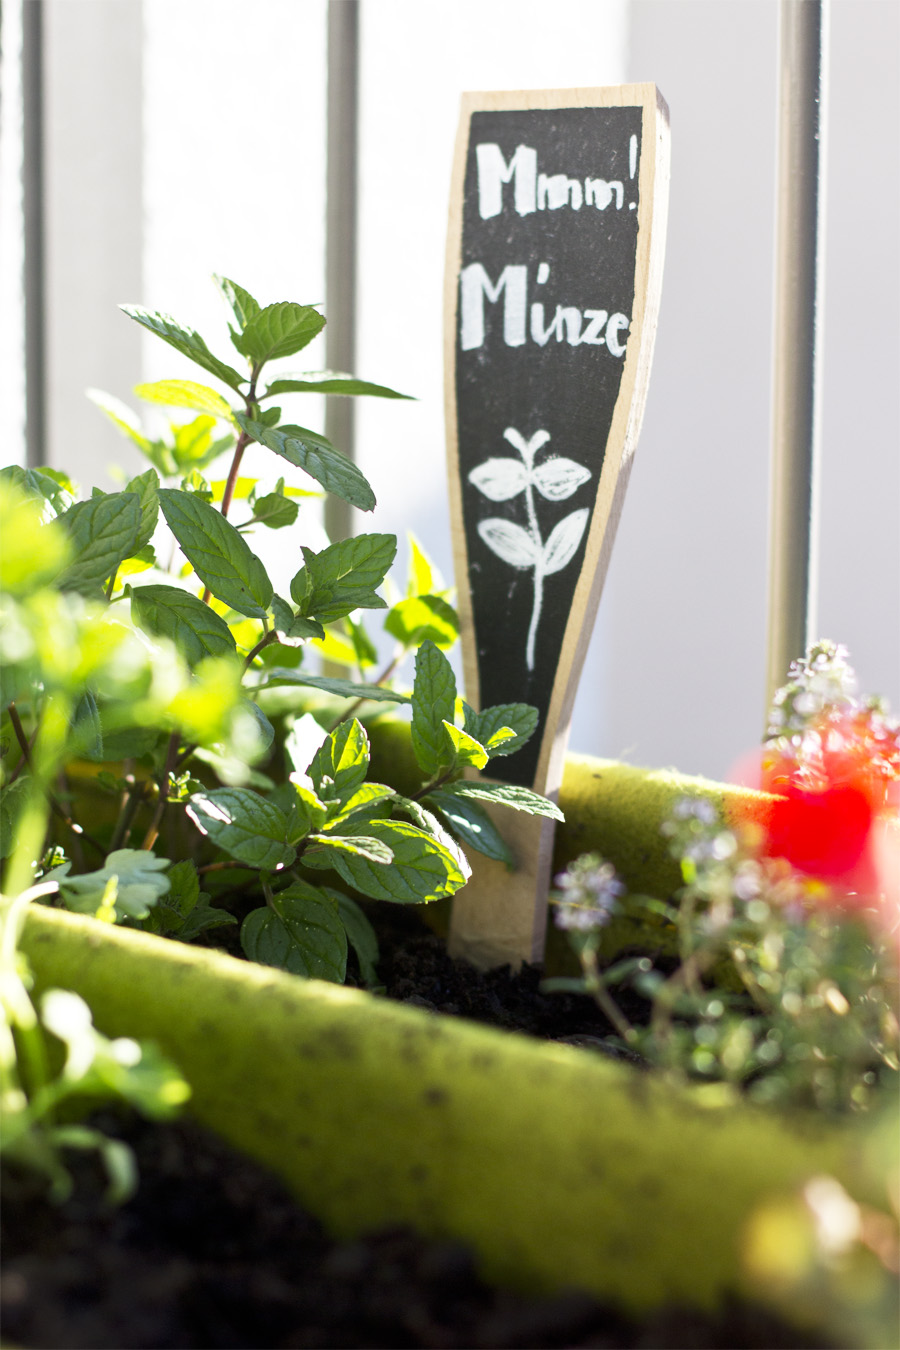 Grow your own herb garden on the balcony | LOOK WHAT I MADE ...